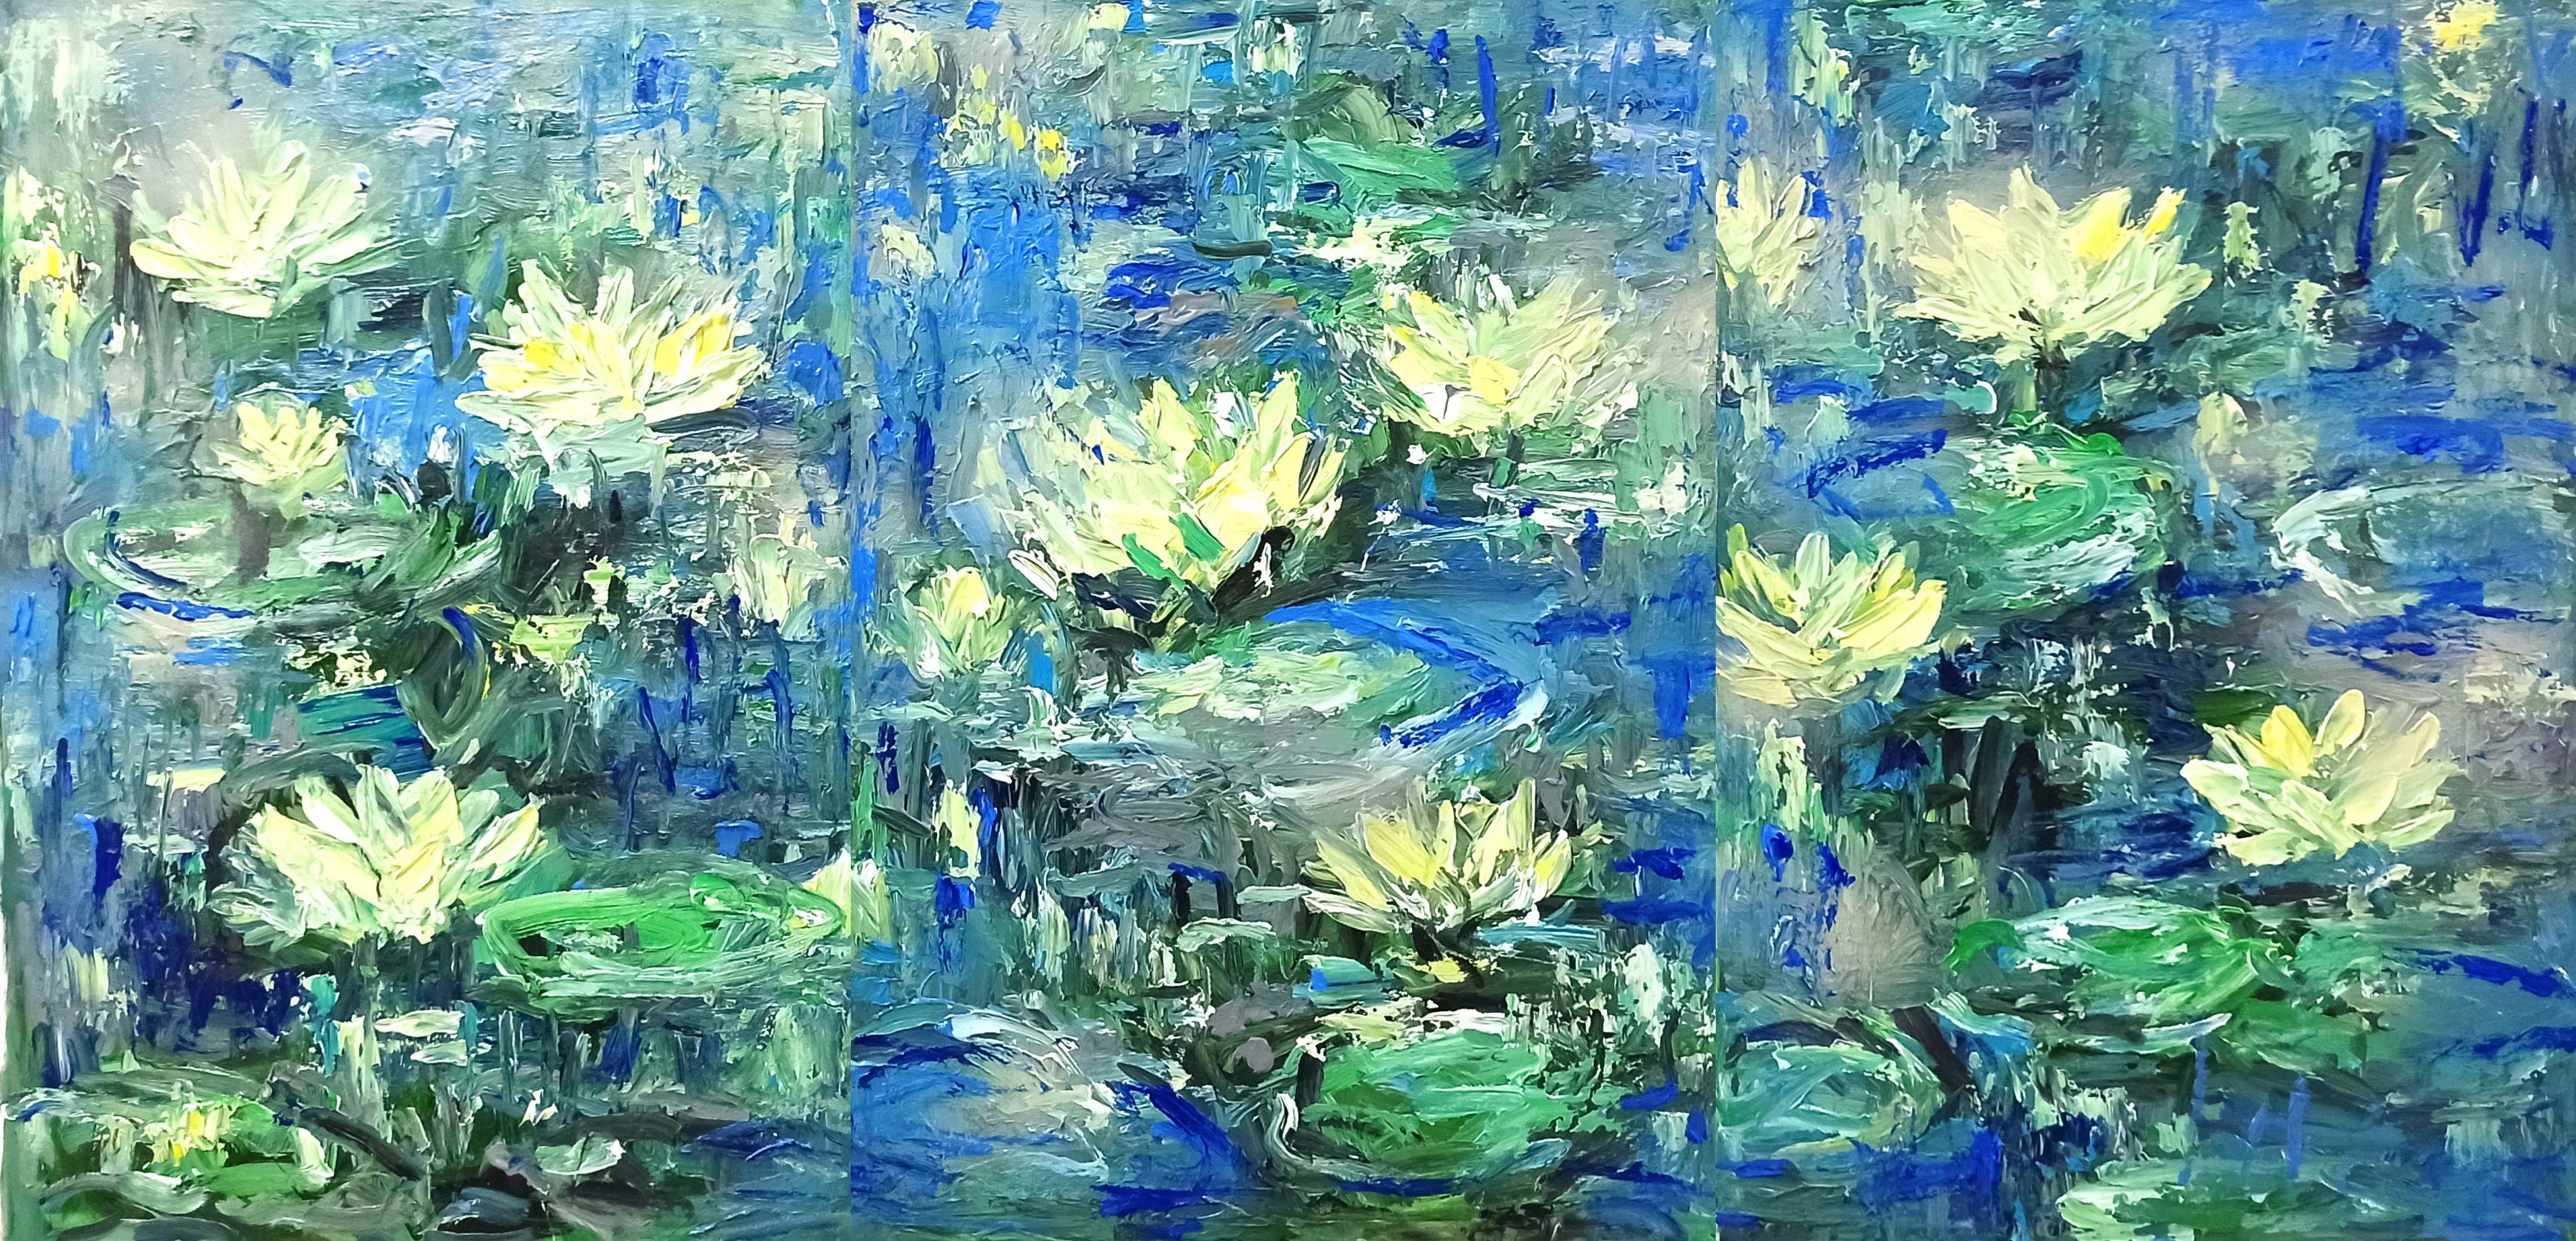 I paint the lotus flower early in the morning when the sun has not yet risen and is still covered with mist. Lotus is a pure flower with a very gentle, ethereal fragrance, it is a symbol of purity in Buddhism. Painting in the spirit of abstract